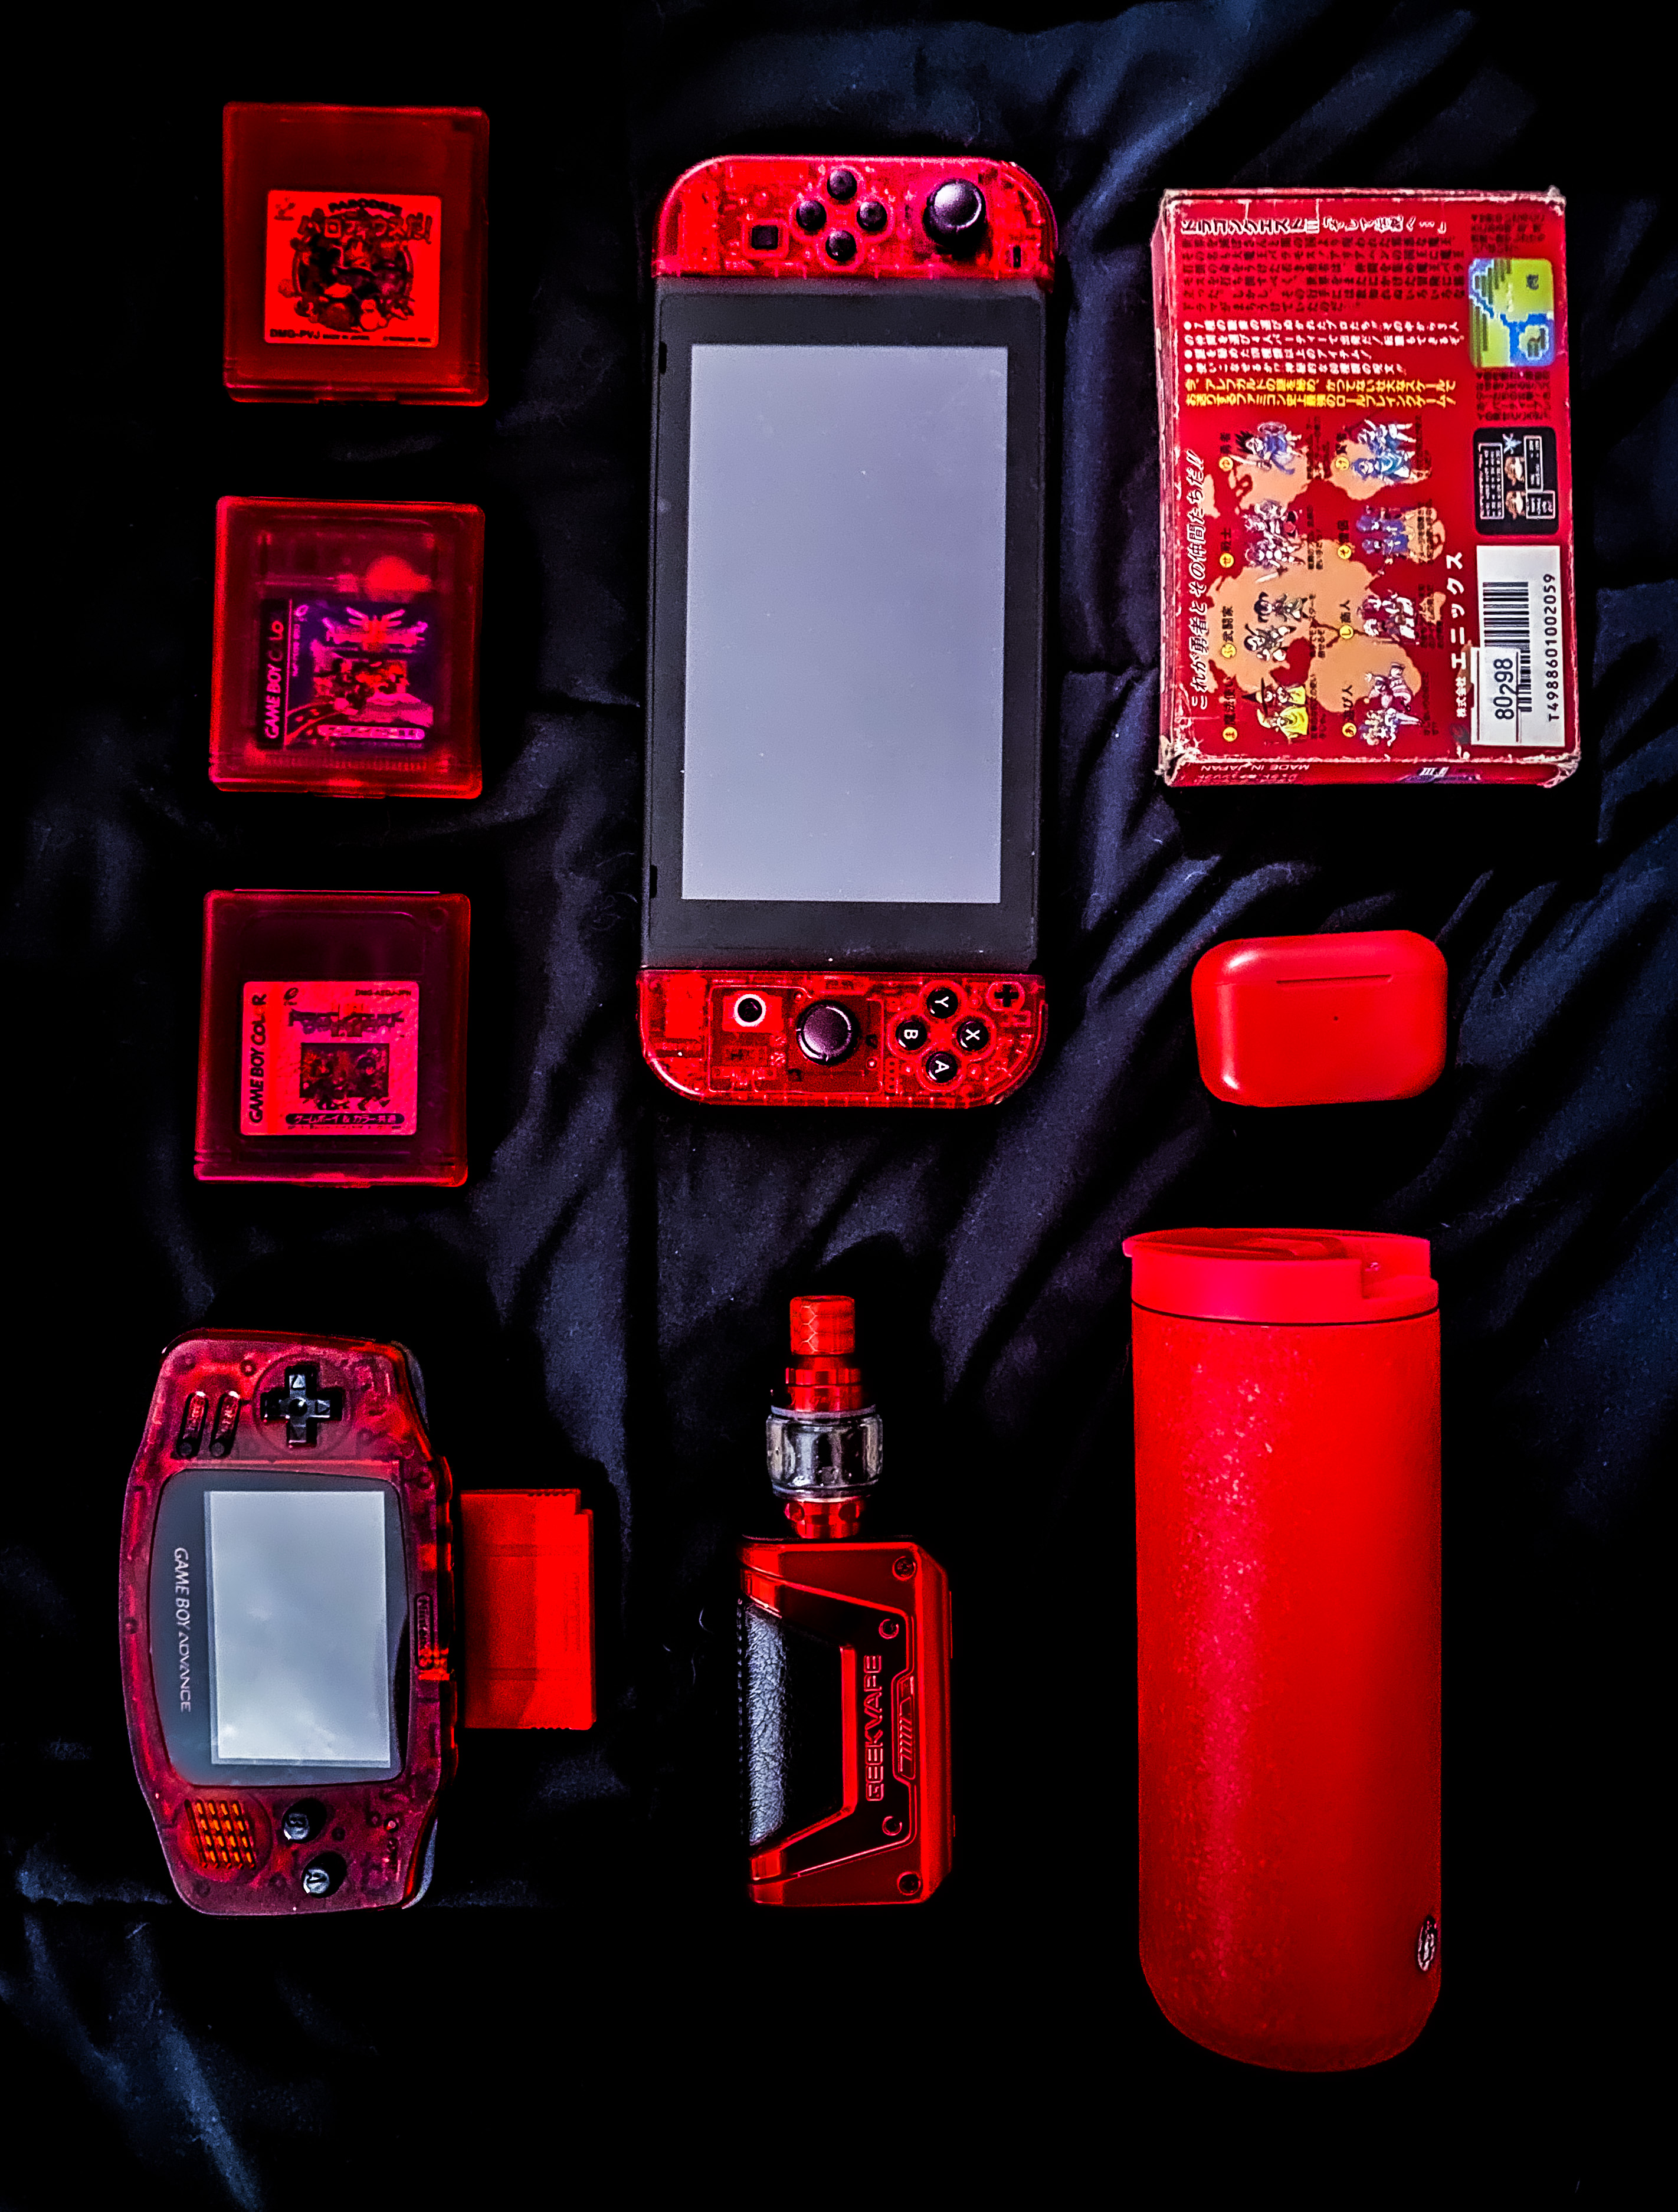 a photo of many red objects, surely too many to list